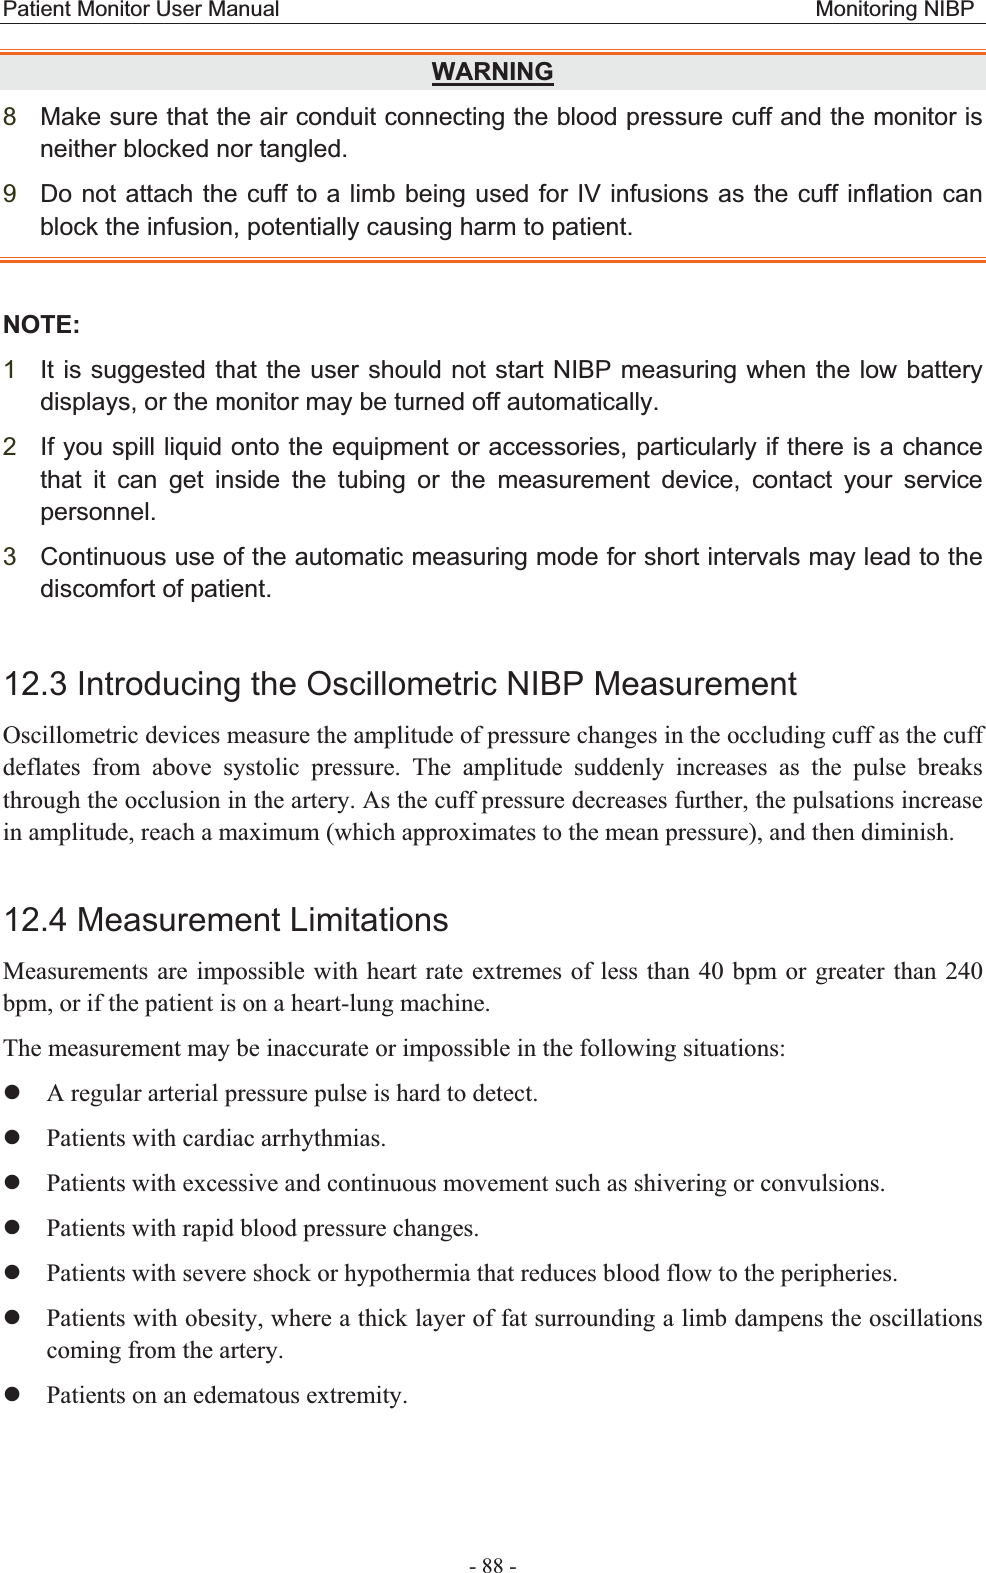 Patient Monitor User Manual                                                 Monitoring NIBP  - 88 - WARNING 8Make sure that the air conduit connecting the blood pressure cuff and the monitor is neither blocked nor tangled. 9Do not attach the cuff to a limb being used for IV infusions as the cuff inflation can block the infusion, potentially causing harm to patient. NOTE:1It is suggested that the user should not start NIBP measuring when the low battery displays, or the monitor may be turned off automatically. 2If you spill liquid onto the equipment or accessories, particularly if there is a chance that it can get inside the tubing or the measurement device, contact your service personnel. 3Continuous use of the automatic measuring mode for short intervals may lead to the discomfort of patient. 12.3 Introducing the Oscillometric NIBP Measurement Oscillometric devices measure the amplitude of pressure changes in the occluding cuff as the cuff deflates from above systolic pressure. The amplitude suddenly increases as the pulse breaks through the occlusion in the artery. As the cuff pressure decreases further, the pulsations increase in amplitude, reach a maximum (which approximates to the mean pressure), and then diminish. 12.4 Measurement Limitations Measurements are impossible with heart rate extremes of less than 40 bpm or greater than 240 bpm, or if the patient is on a heart-lung machine. The measurement may be inaccurate or impossible in the following situations: zA regular arterial pressure pulse is hard to detect. zPatients with cardiac arrhythmias. zPatients with excessive and continuous movement such as shivering or convulsions. zPatients with rapid blood pressure changes. zPatients with severe shock or hypothermia that reduces blood flow to the peripheries. zPatients with obesity, where a thick layer of fat surrounding a limb dampens the oscillations coming from the artery. zPatients on an edematous extremity. 